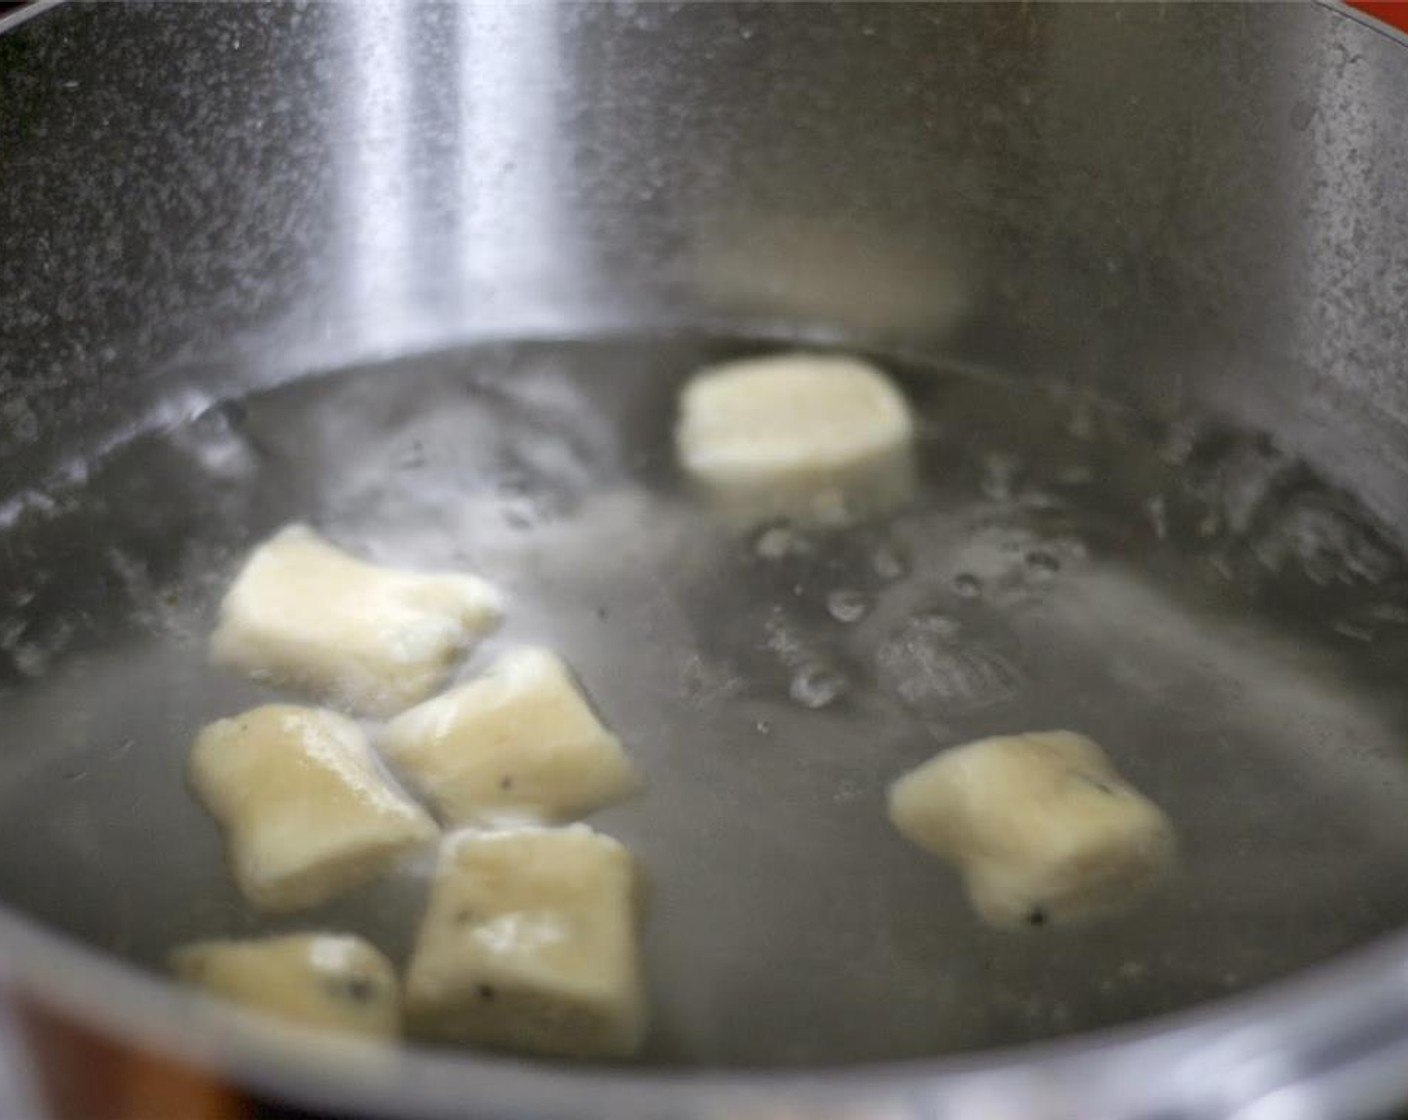 step 8 Working in batches, add some of the gnocchi to the boiling water. Once they float to the surface, let them cook an additional 3 to 4 minutes. Remove gnocchi with a slotted spoon or skimmer and transfer to a colander set over a bowl.